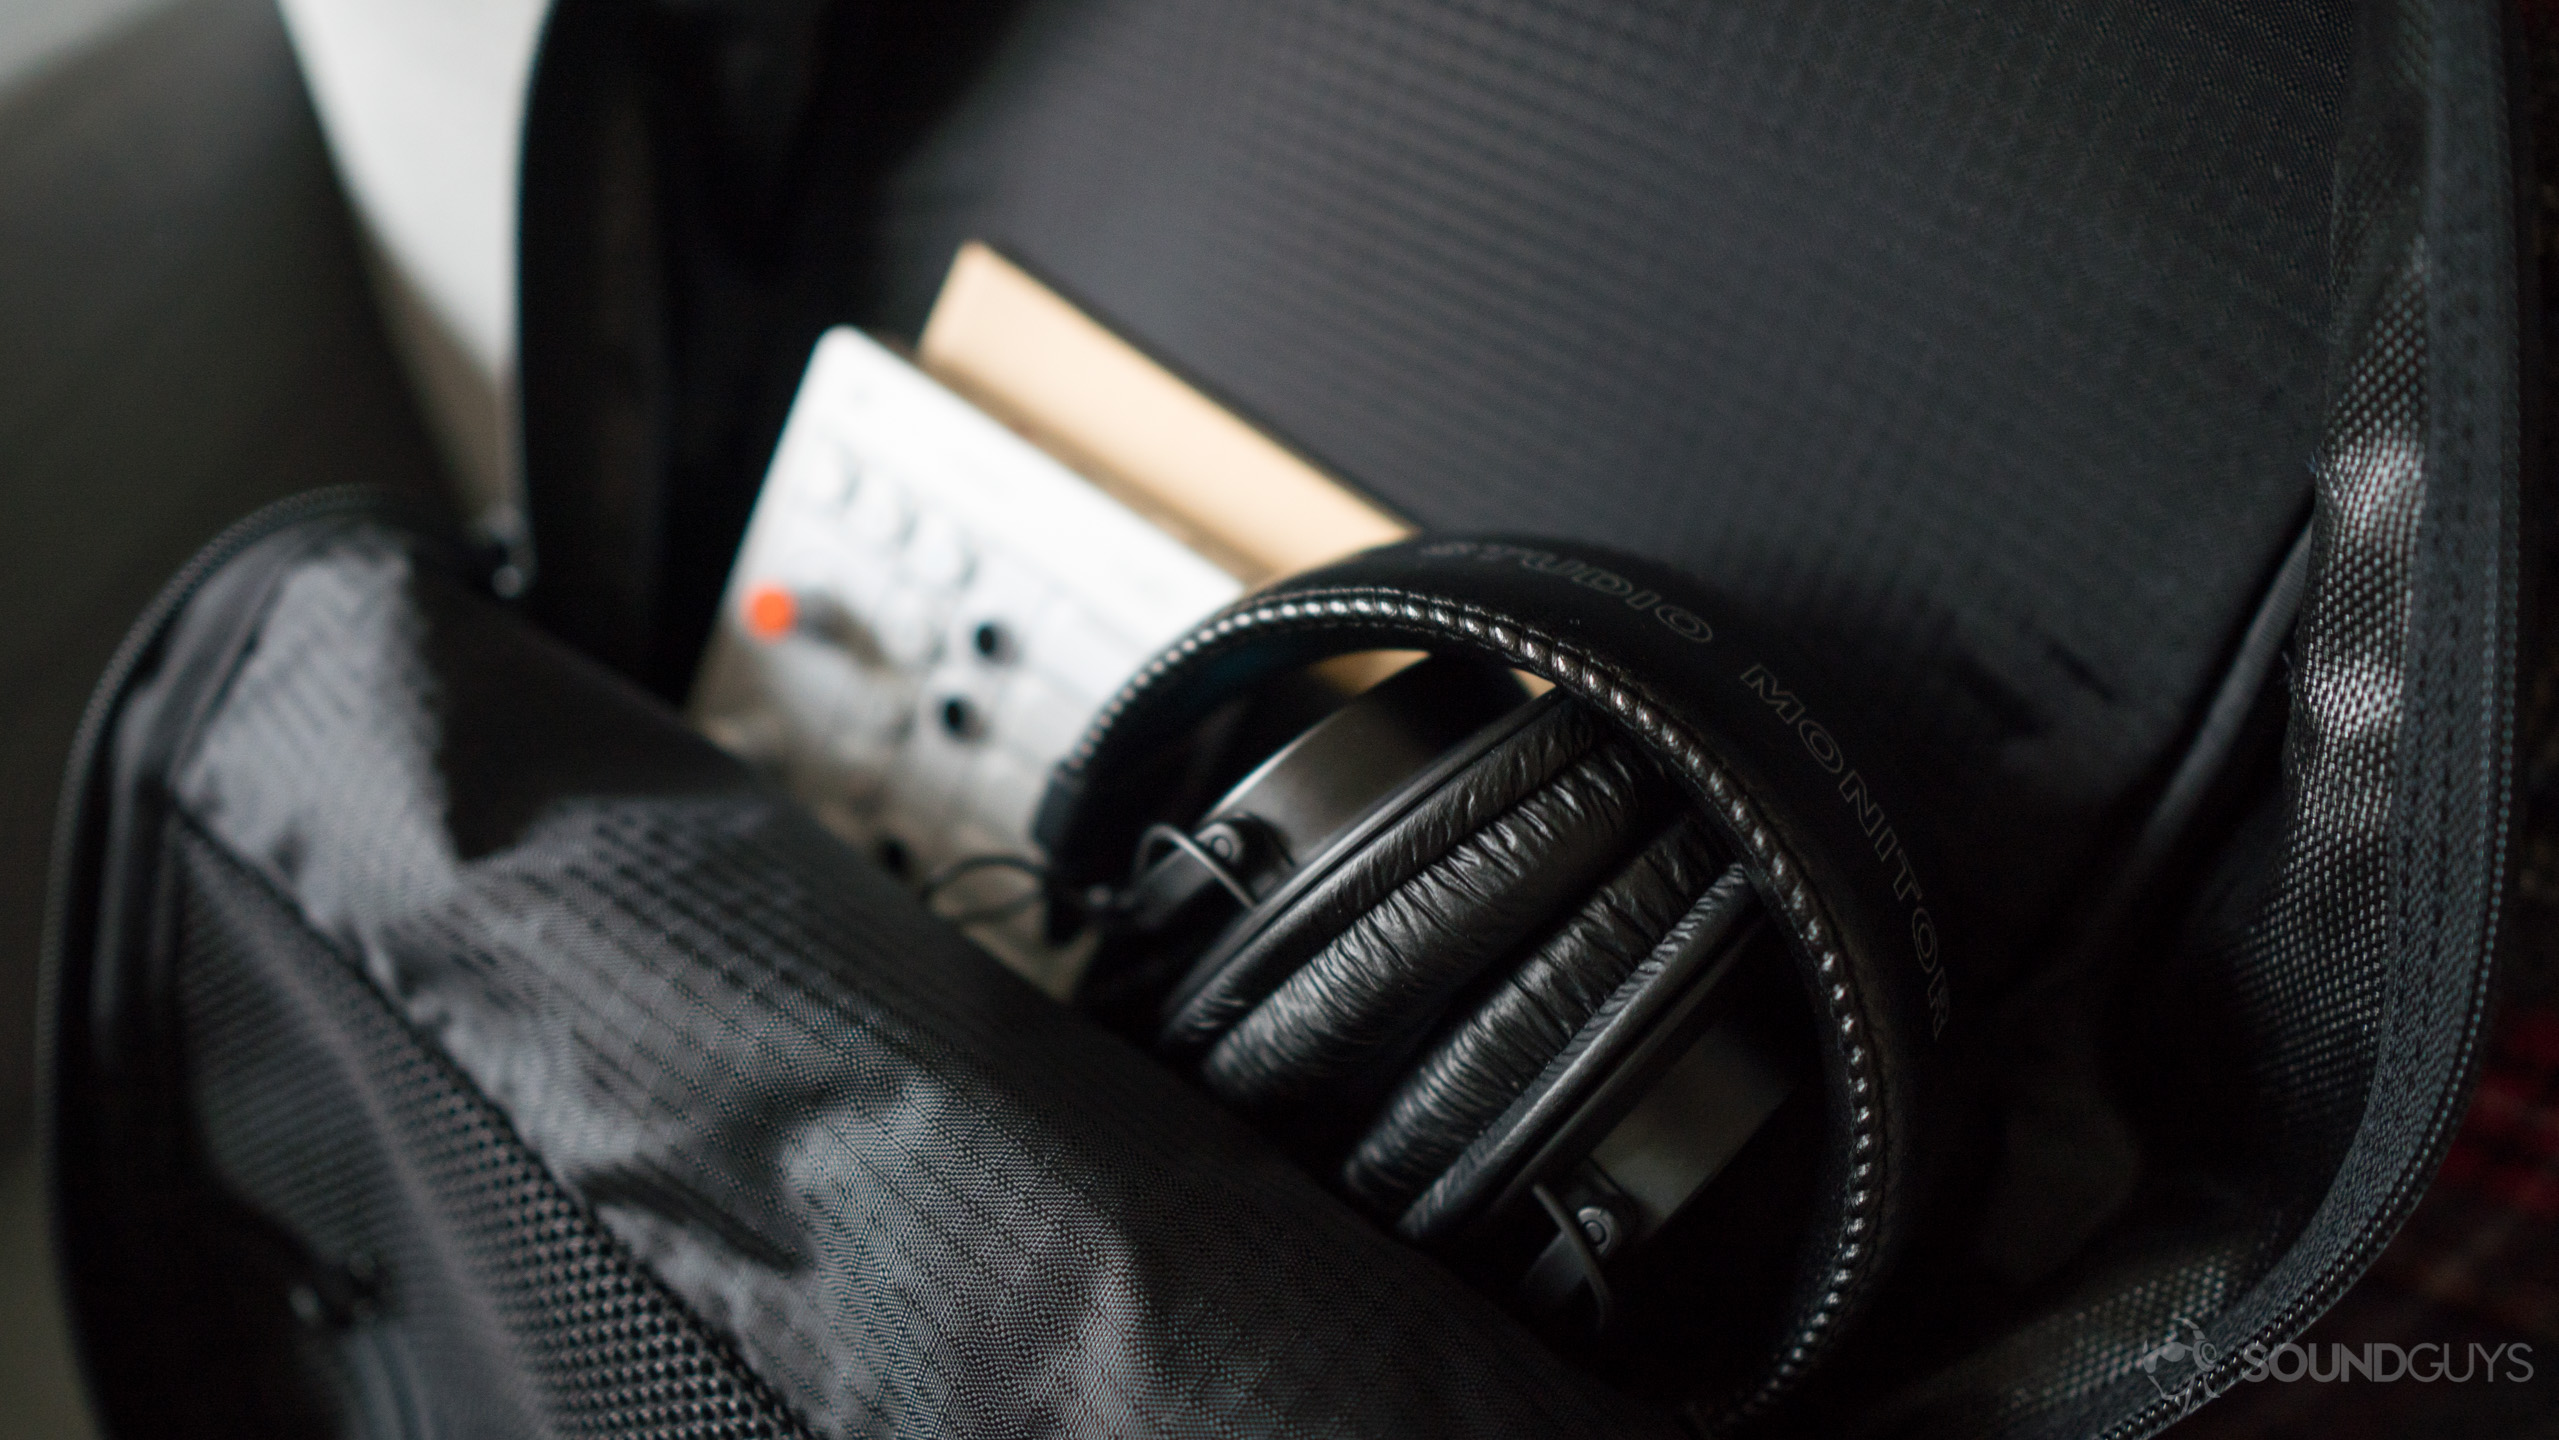 The Sony MDR 7506 headphones in a bag.